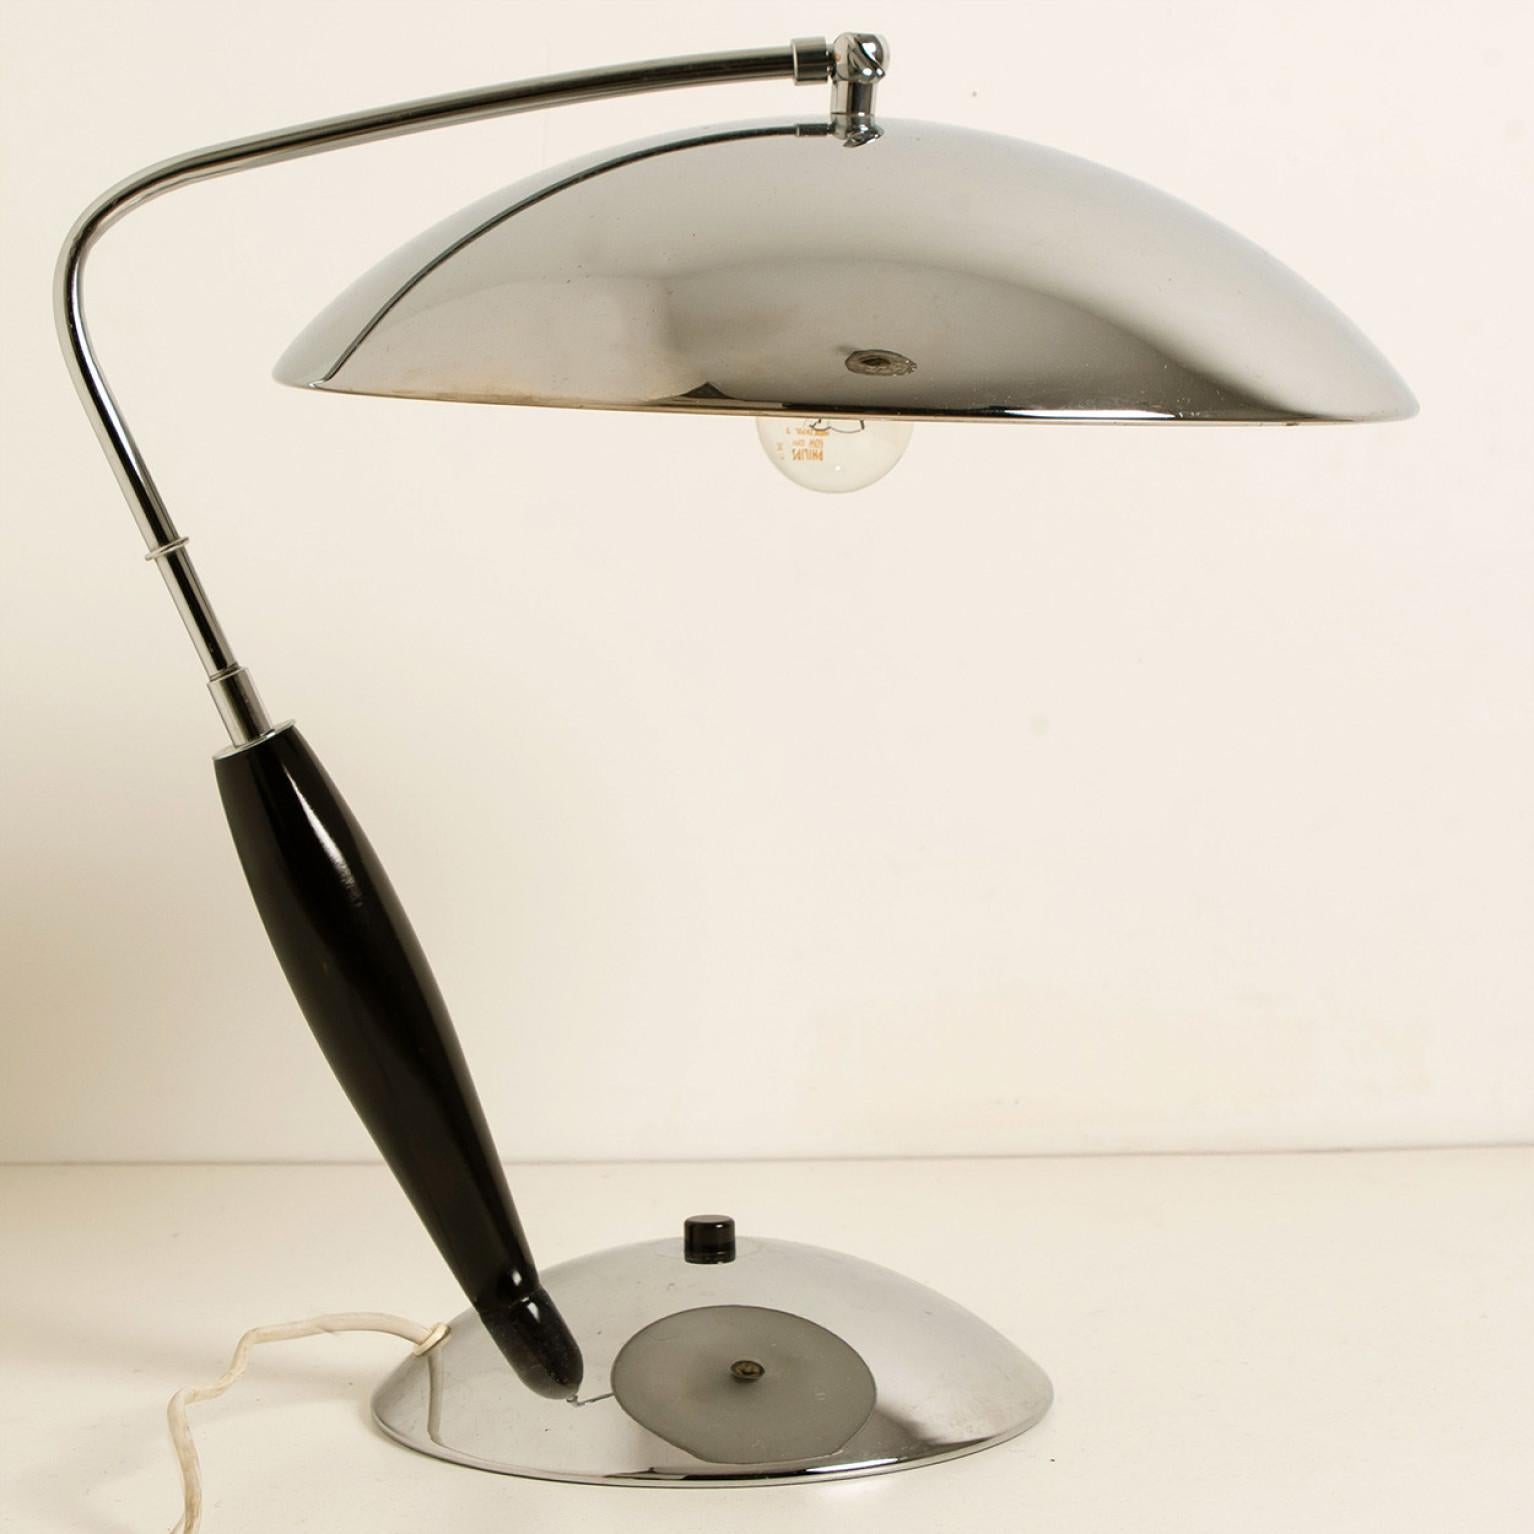 Vintage chrome table lamp with wooden detail, designed and manufactured in the 1970s.
It is possible to adjust the shade to your preference. With on/off button.

The stylish elegance of this lamp suits many interiors, from Midcentury to Danish